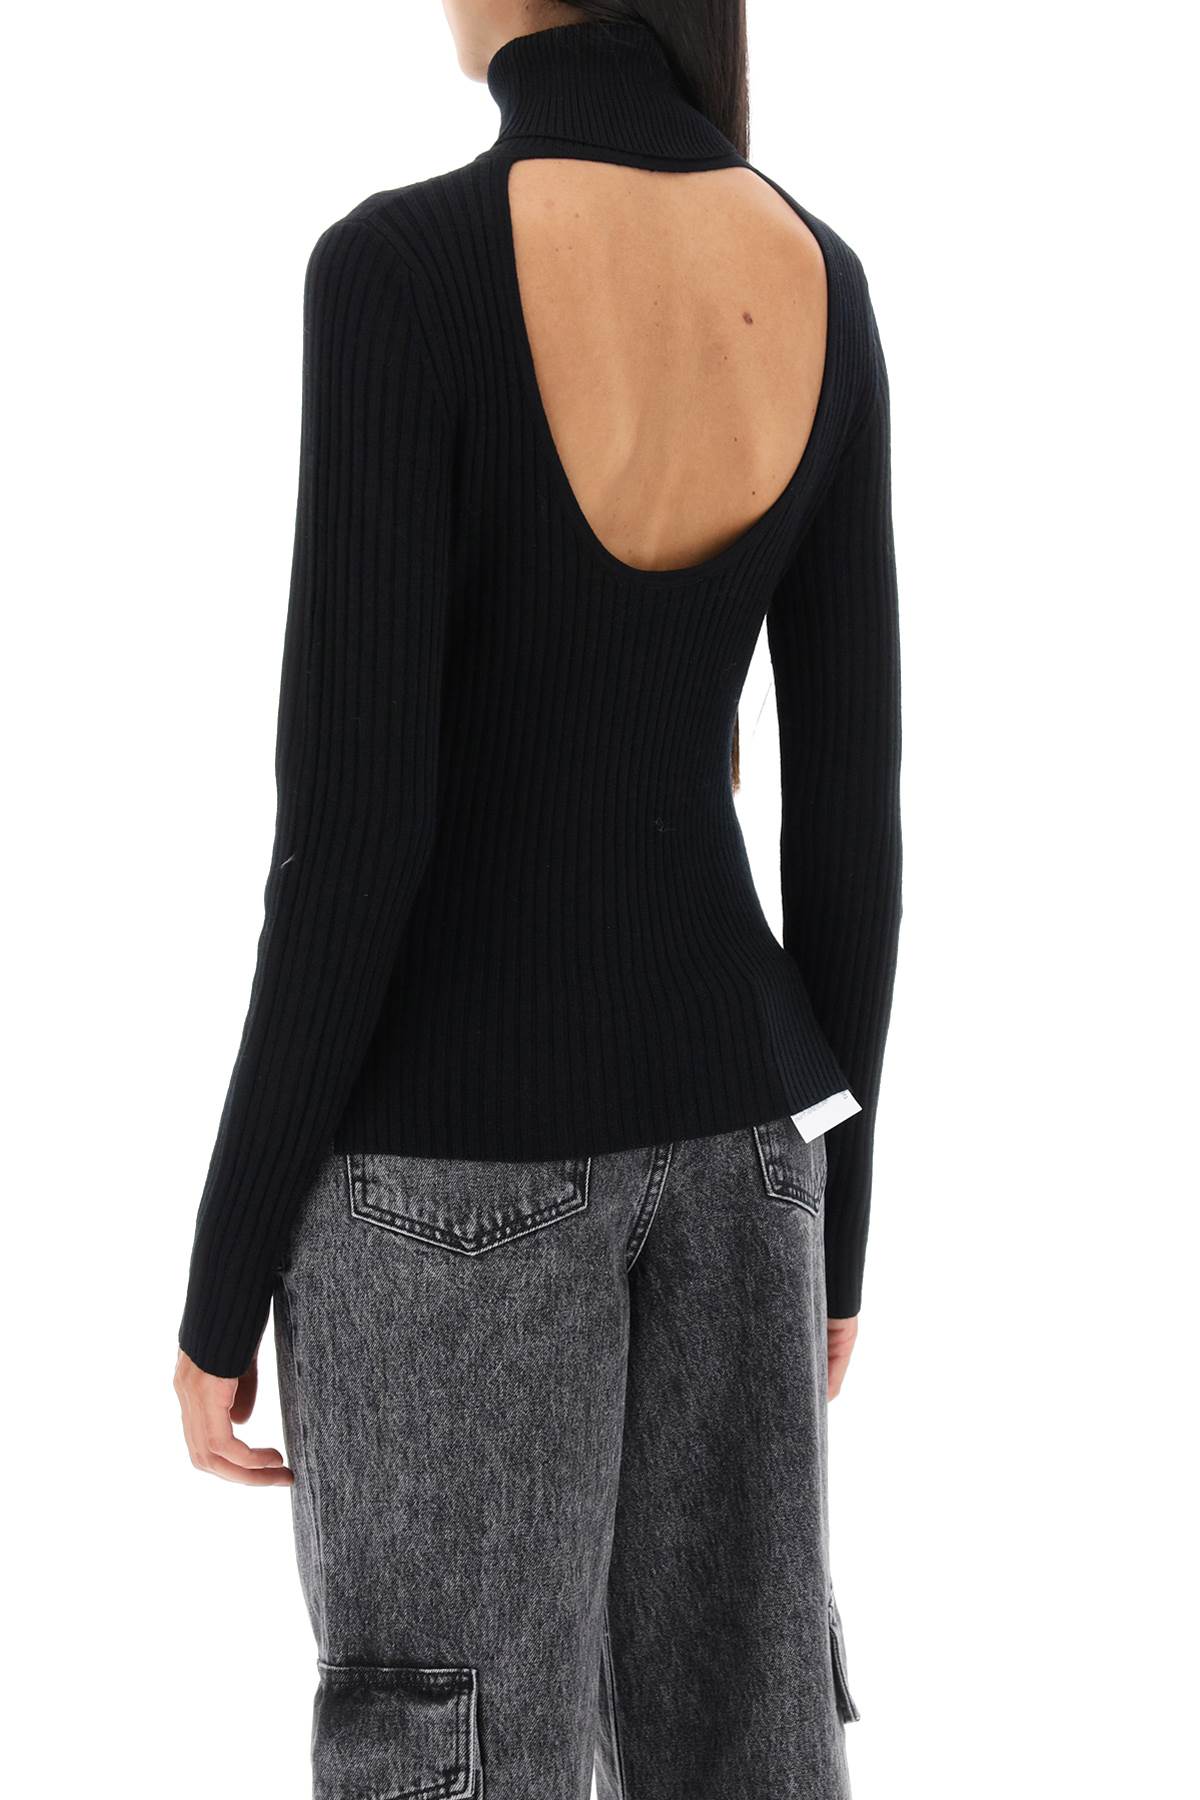 Ganni turtleneck sweater with back cut out-2